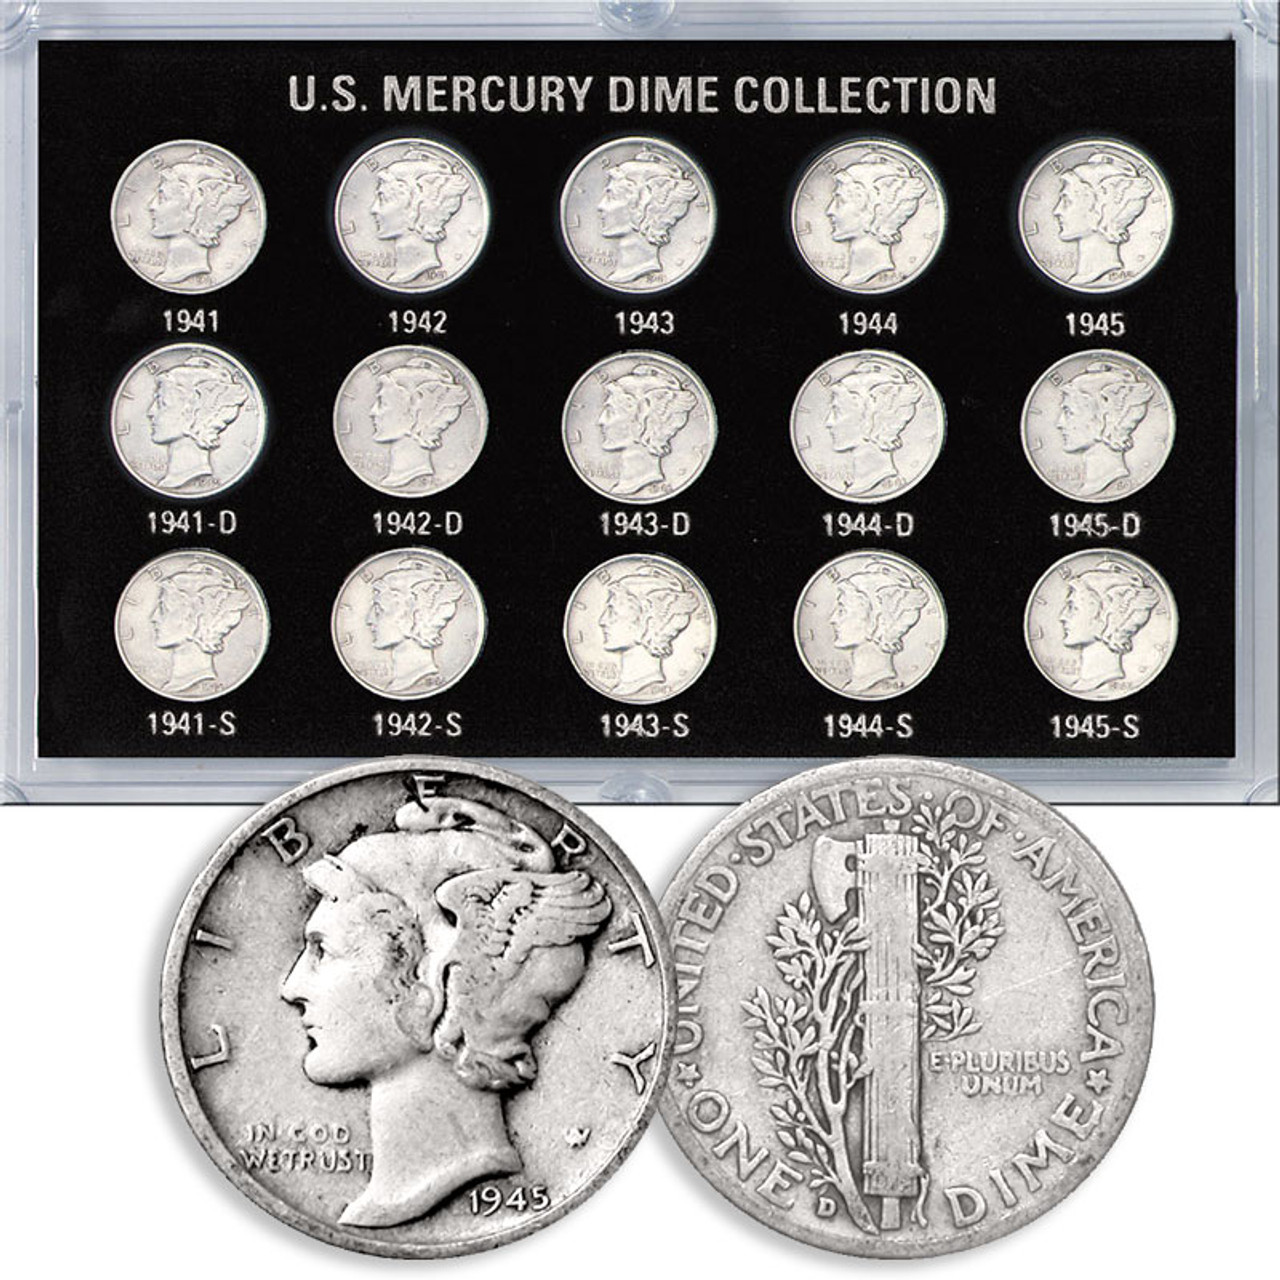 Item name is World War II Mercury Dime Set 41-45. Date is from 1941 to 1945. Item size is per coin, 17.9 millimeter diameter. Item weight and composition is per coin, 2.5 grams of .900 silver. Item shape is round with reeded edge. Mint Mark is Varied. Design elements on obverse are each has Liberty with winged cap, liberty, date, In God We Trust. Design elements on reverse are Fasces with olive branch, United States of America, denomination. The item's condition is mostly fine or better. The item's color is metallic.